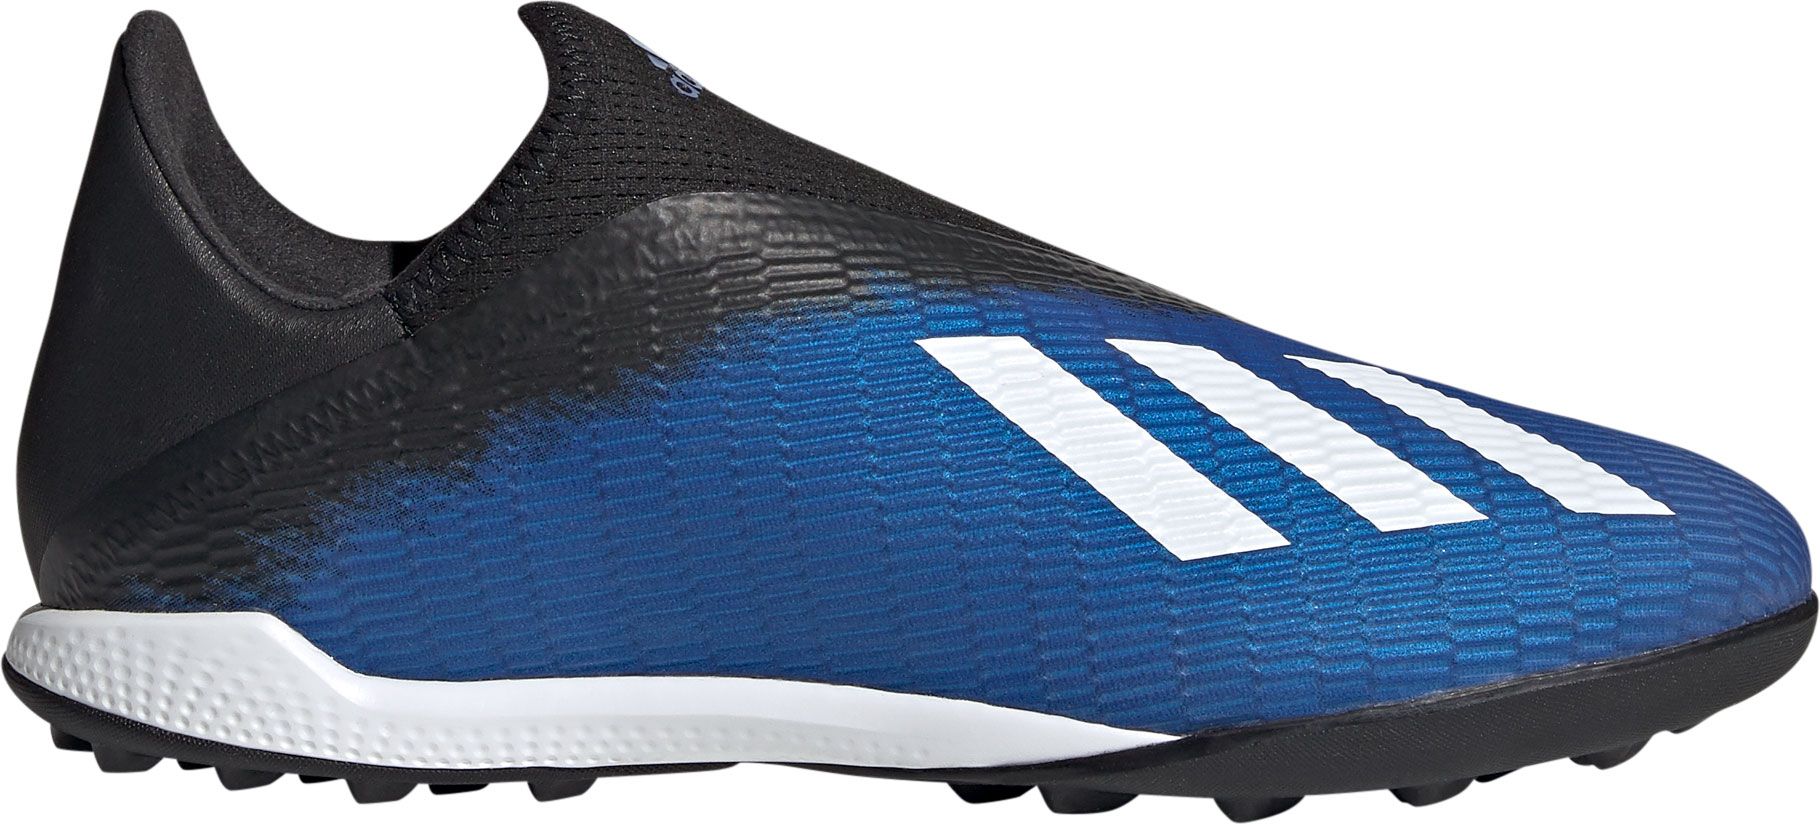 adidas indoor soccer shoes laceless